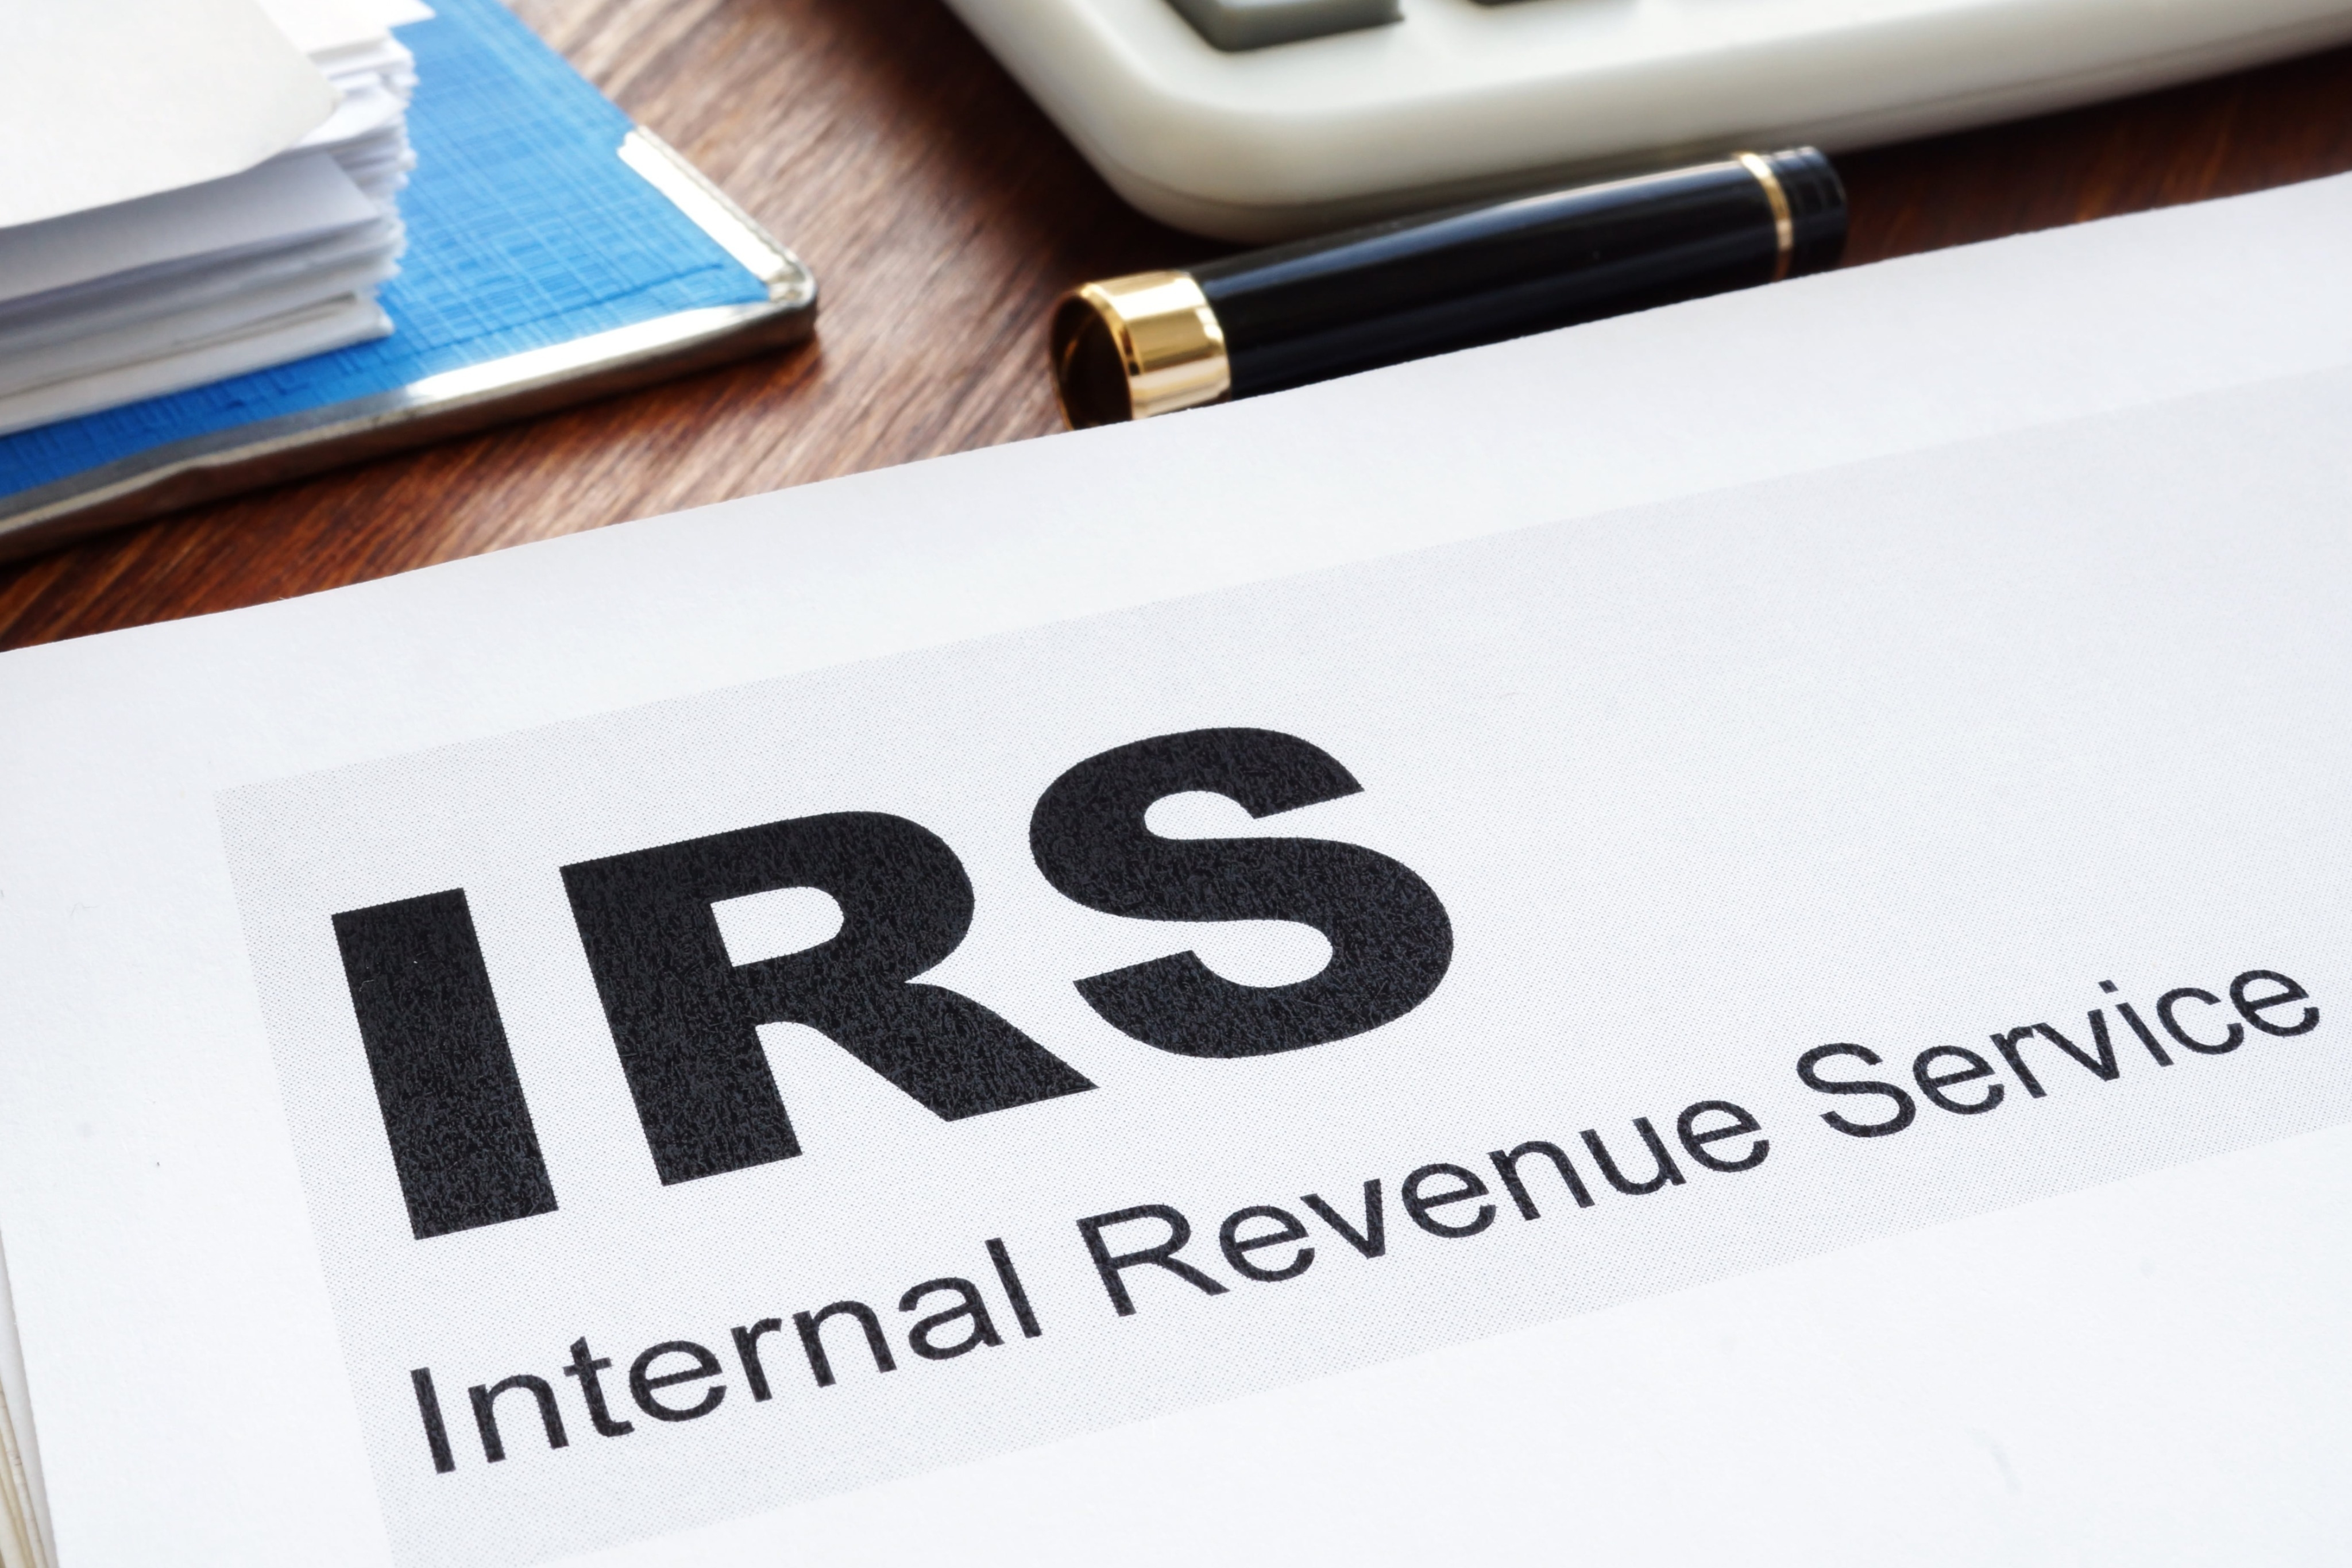 
What To Do If You Owe The IRS And Can't Pay